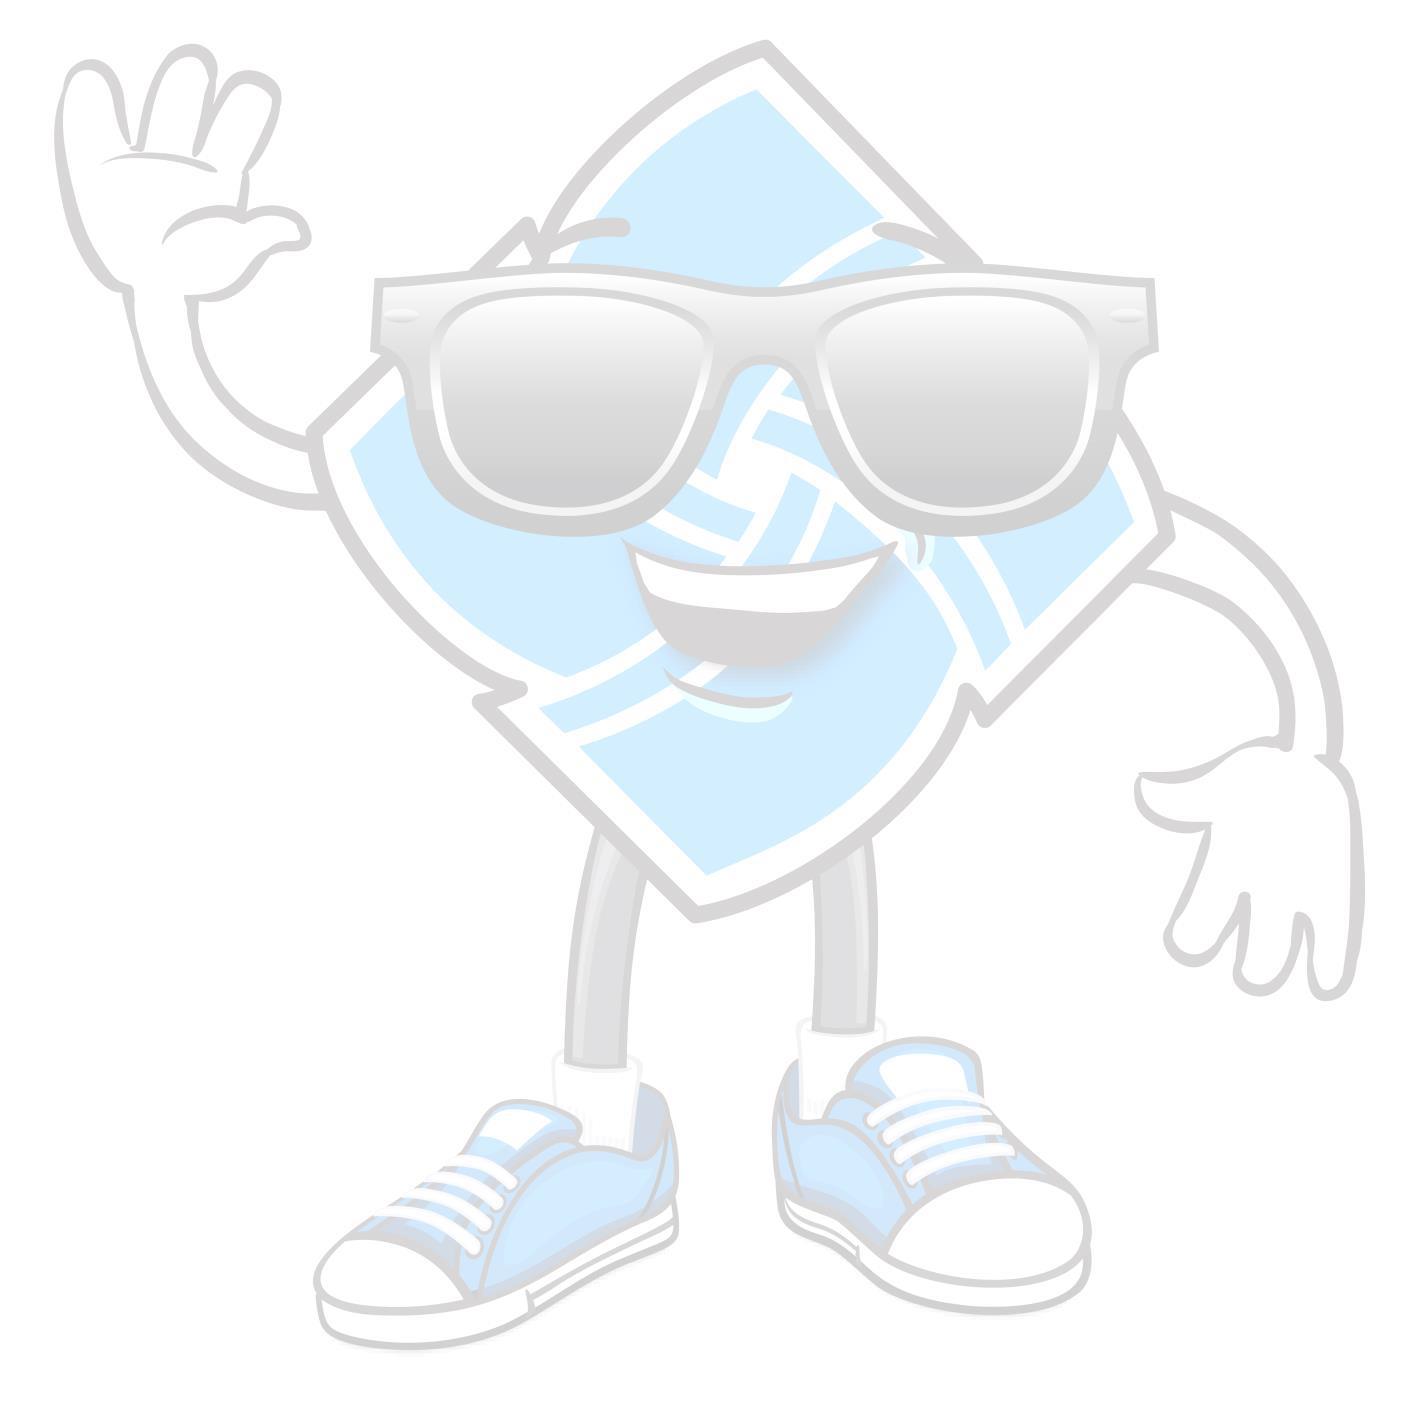 smiling waving credit union logo with sunglasses